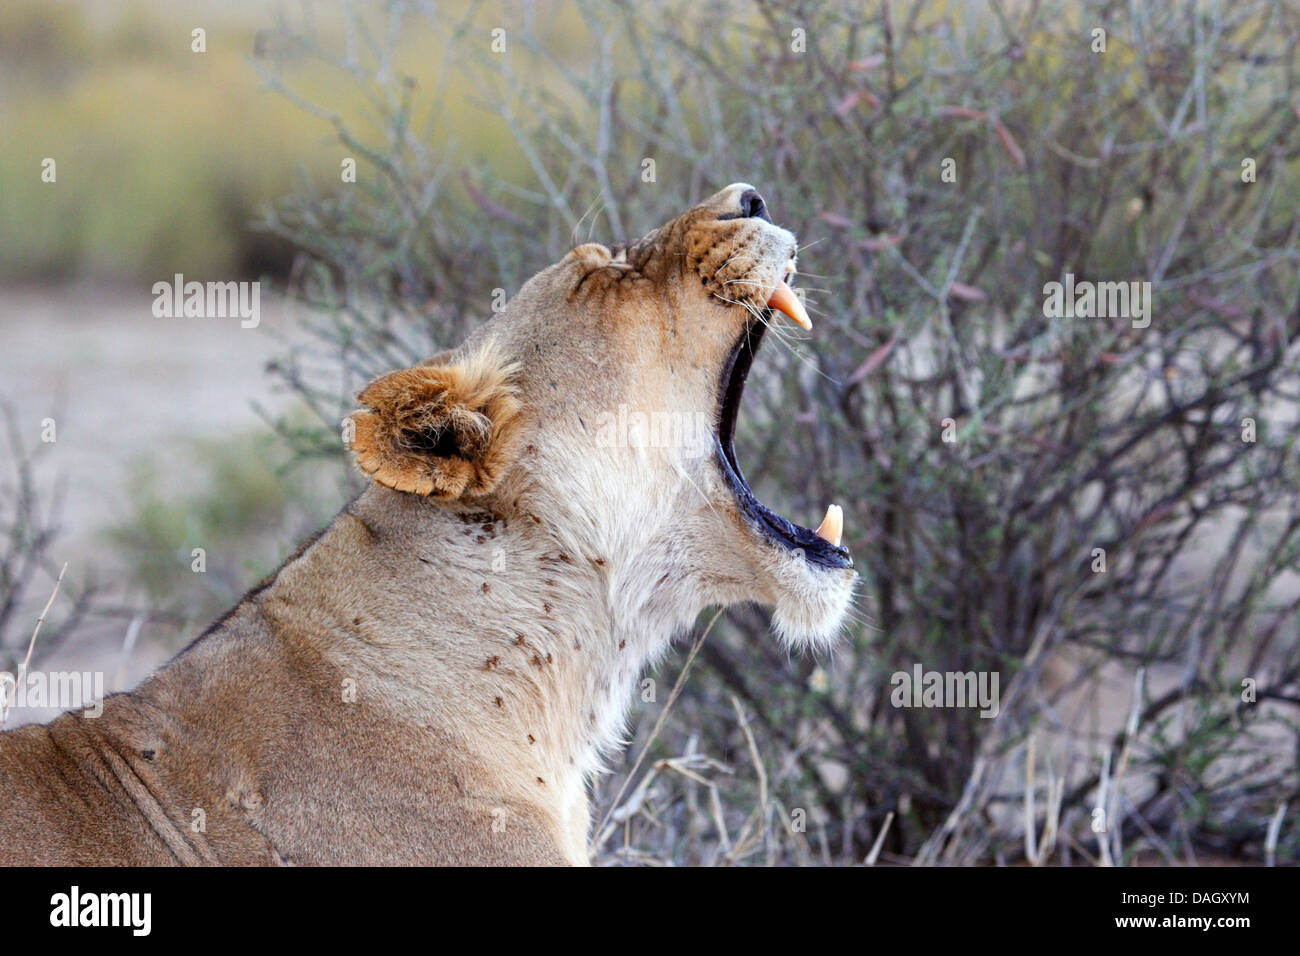 lion (Panthera leo), portrait of a yawning female, South Africa, Kgalagadi Transfrontier National Park Stock Photo